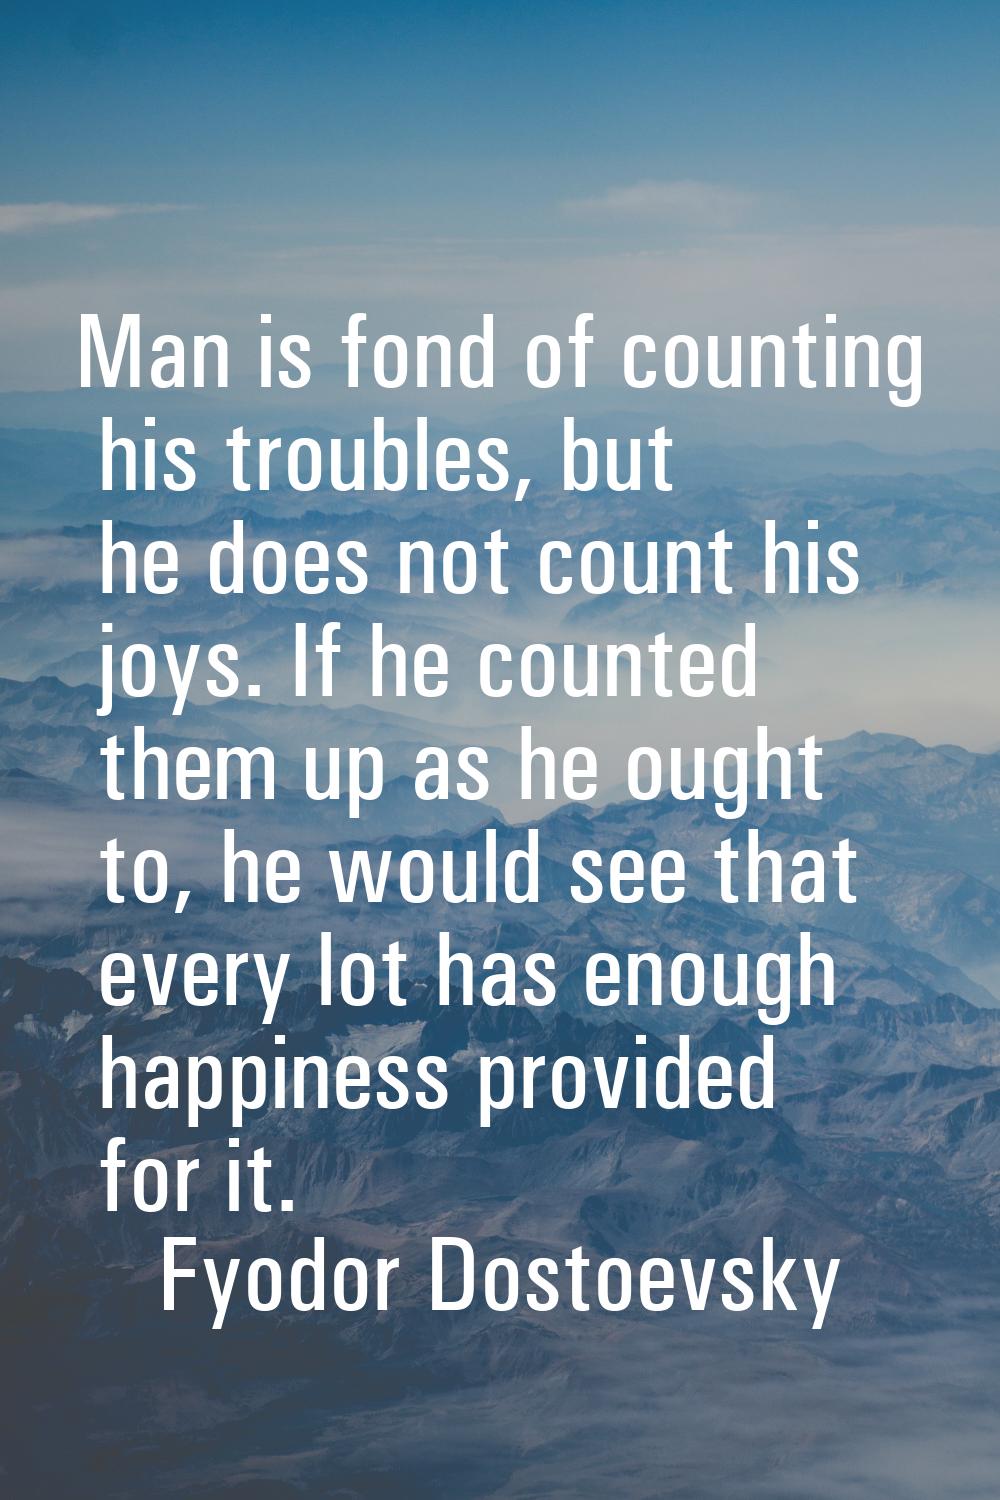 Man is fond of counting his troubles, but he does not count his joys. If he counted them up as he o